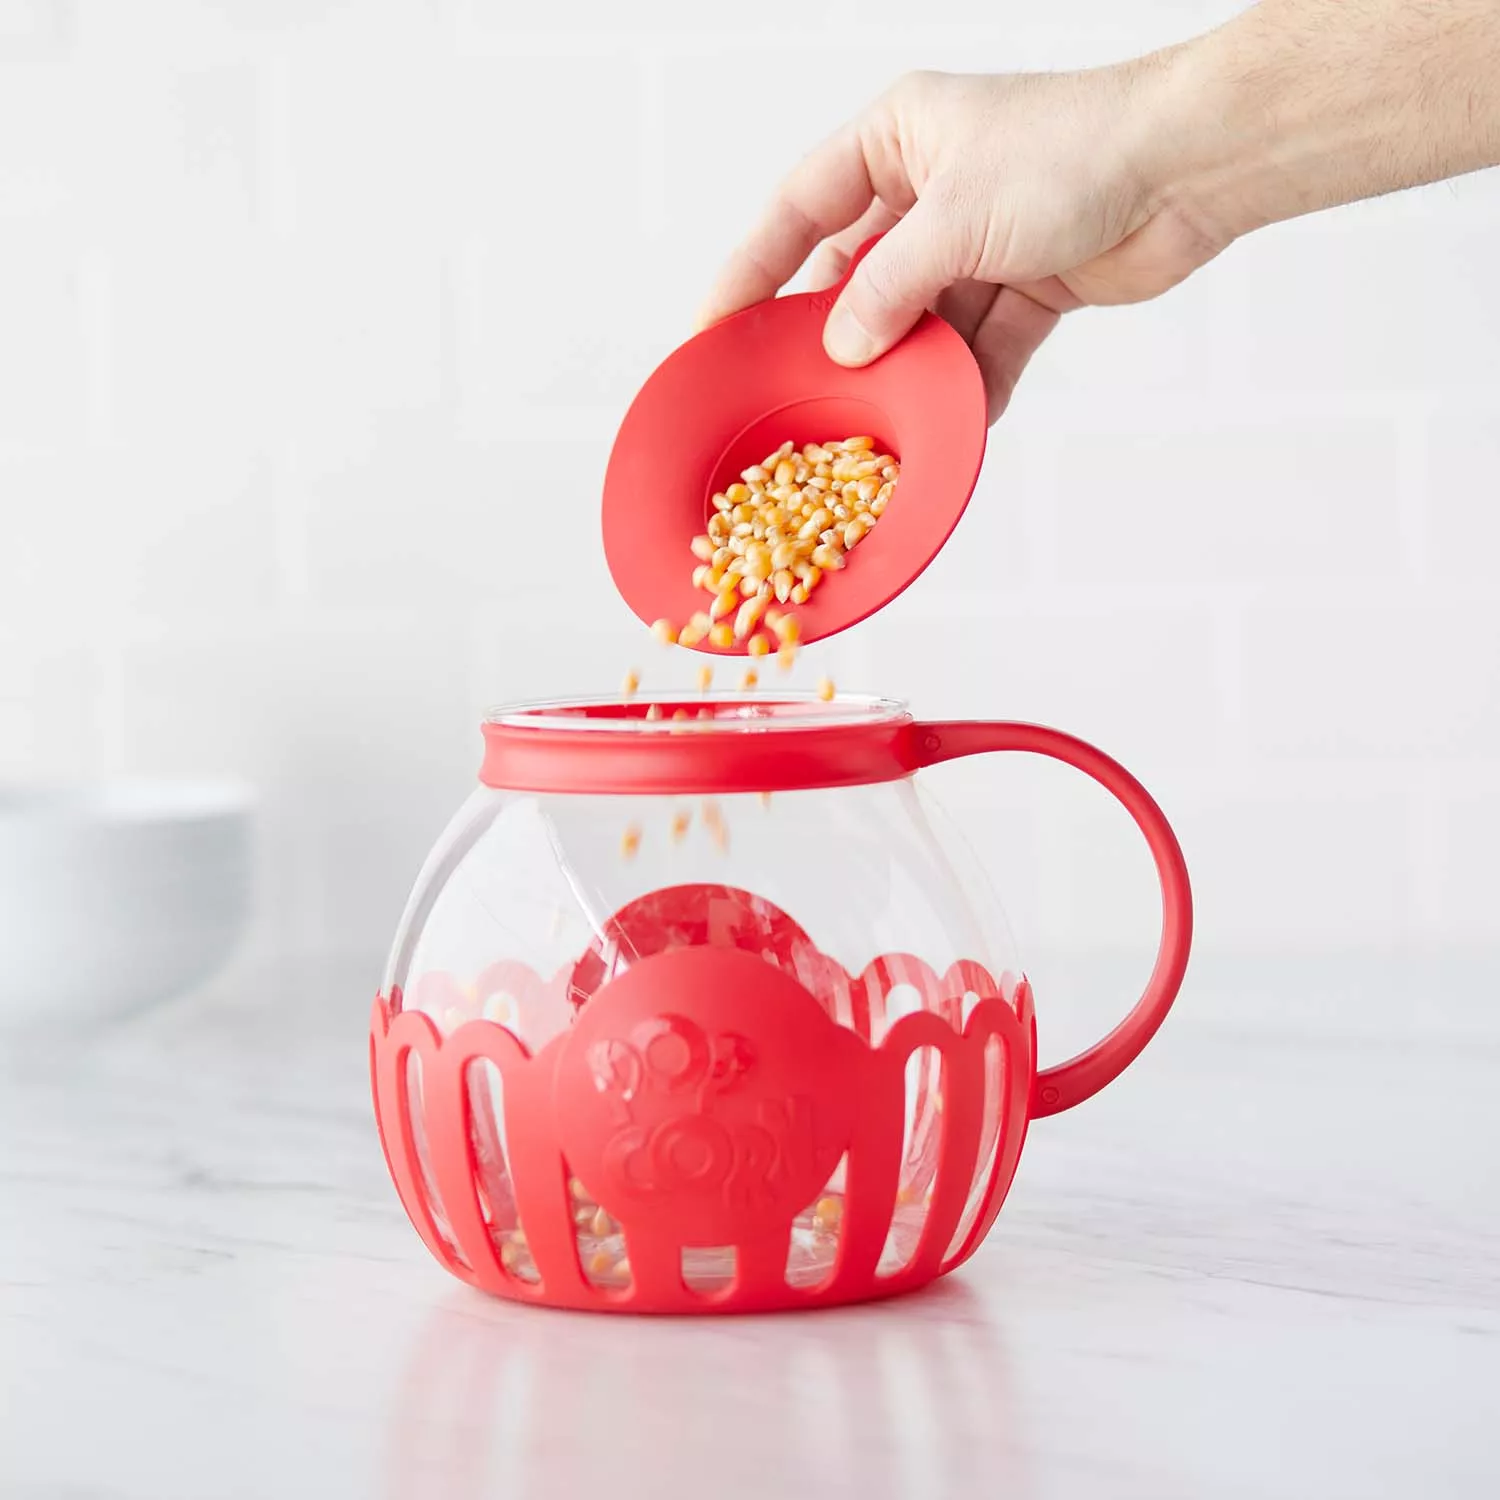 The Ecolution Original Micro-Pop Microwave Popcorn Popper Is Just